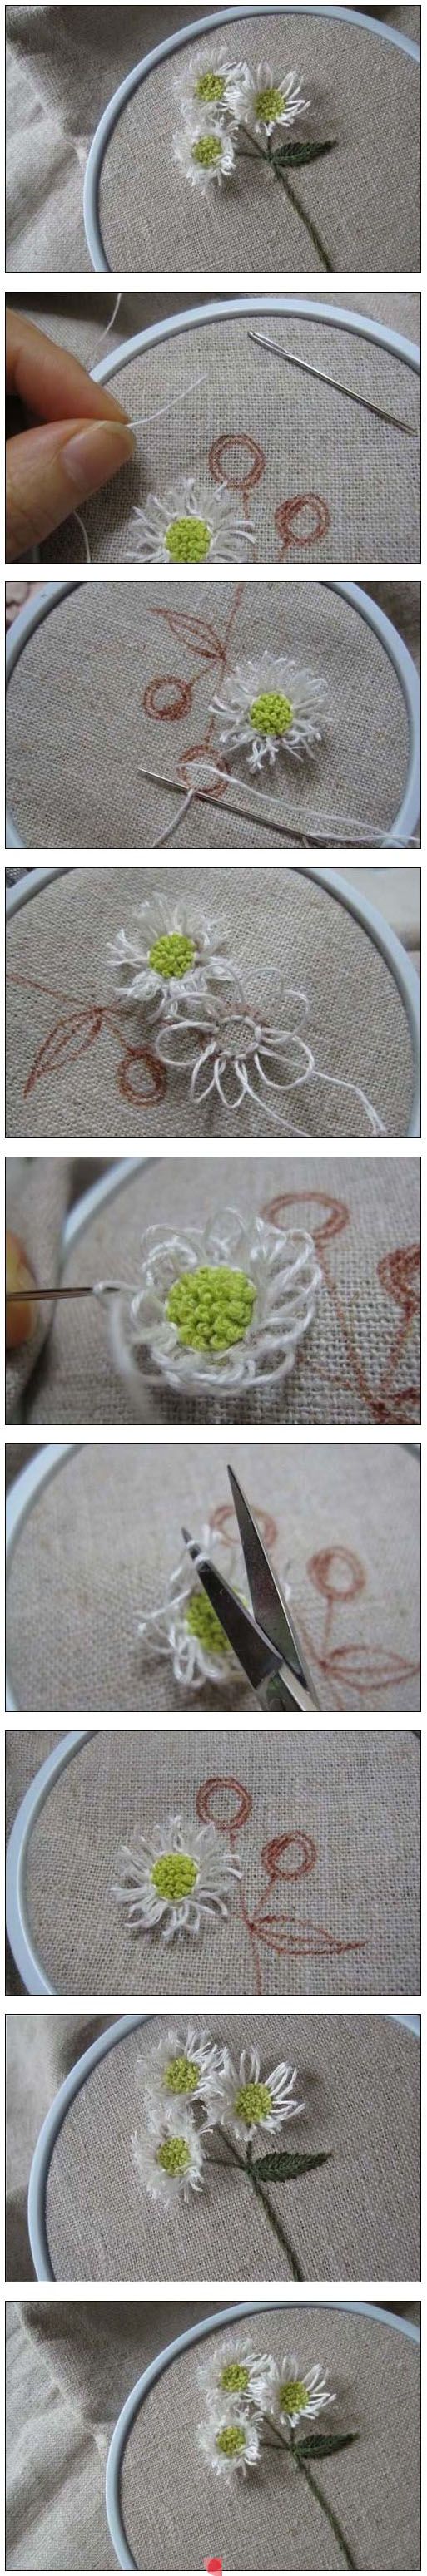 3D embroidery flowers